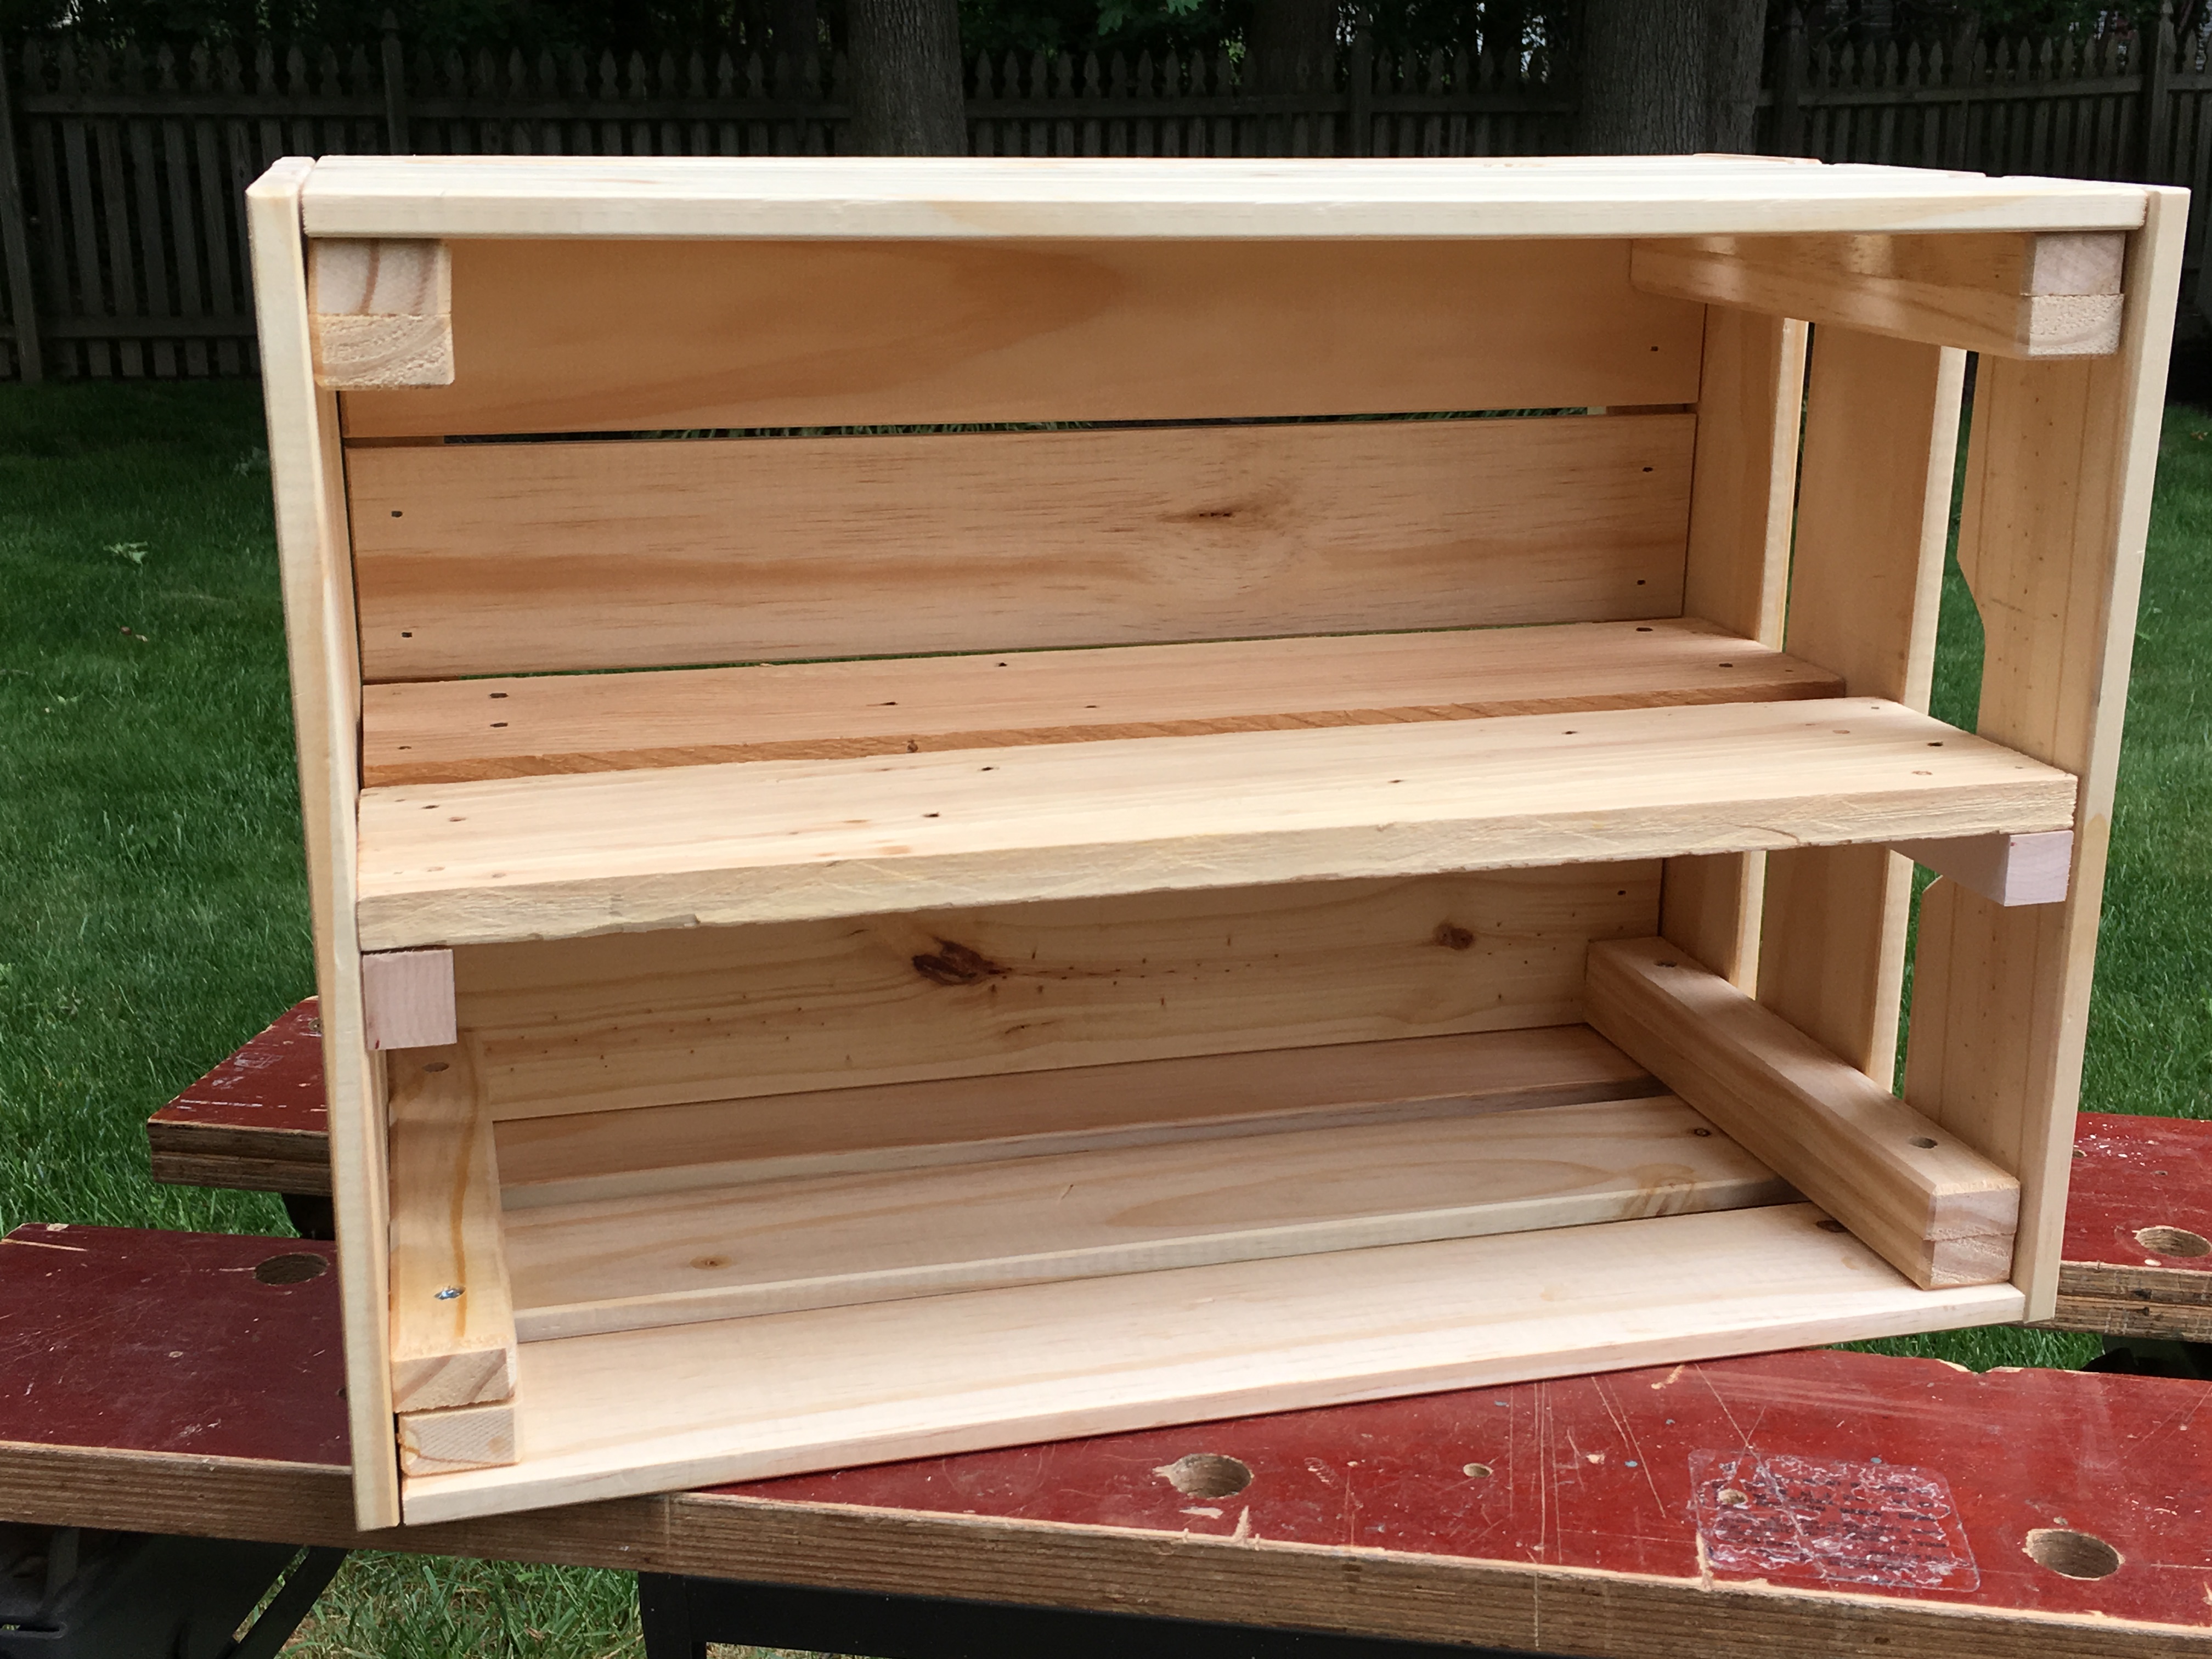 How to Build a Shelf in a Crate. Easy DIY crate project perfect for entertaining. #DIY #crate